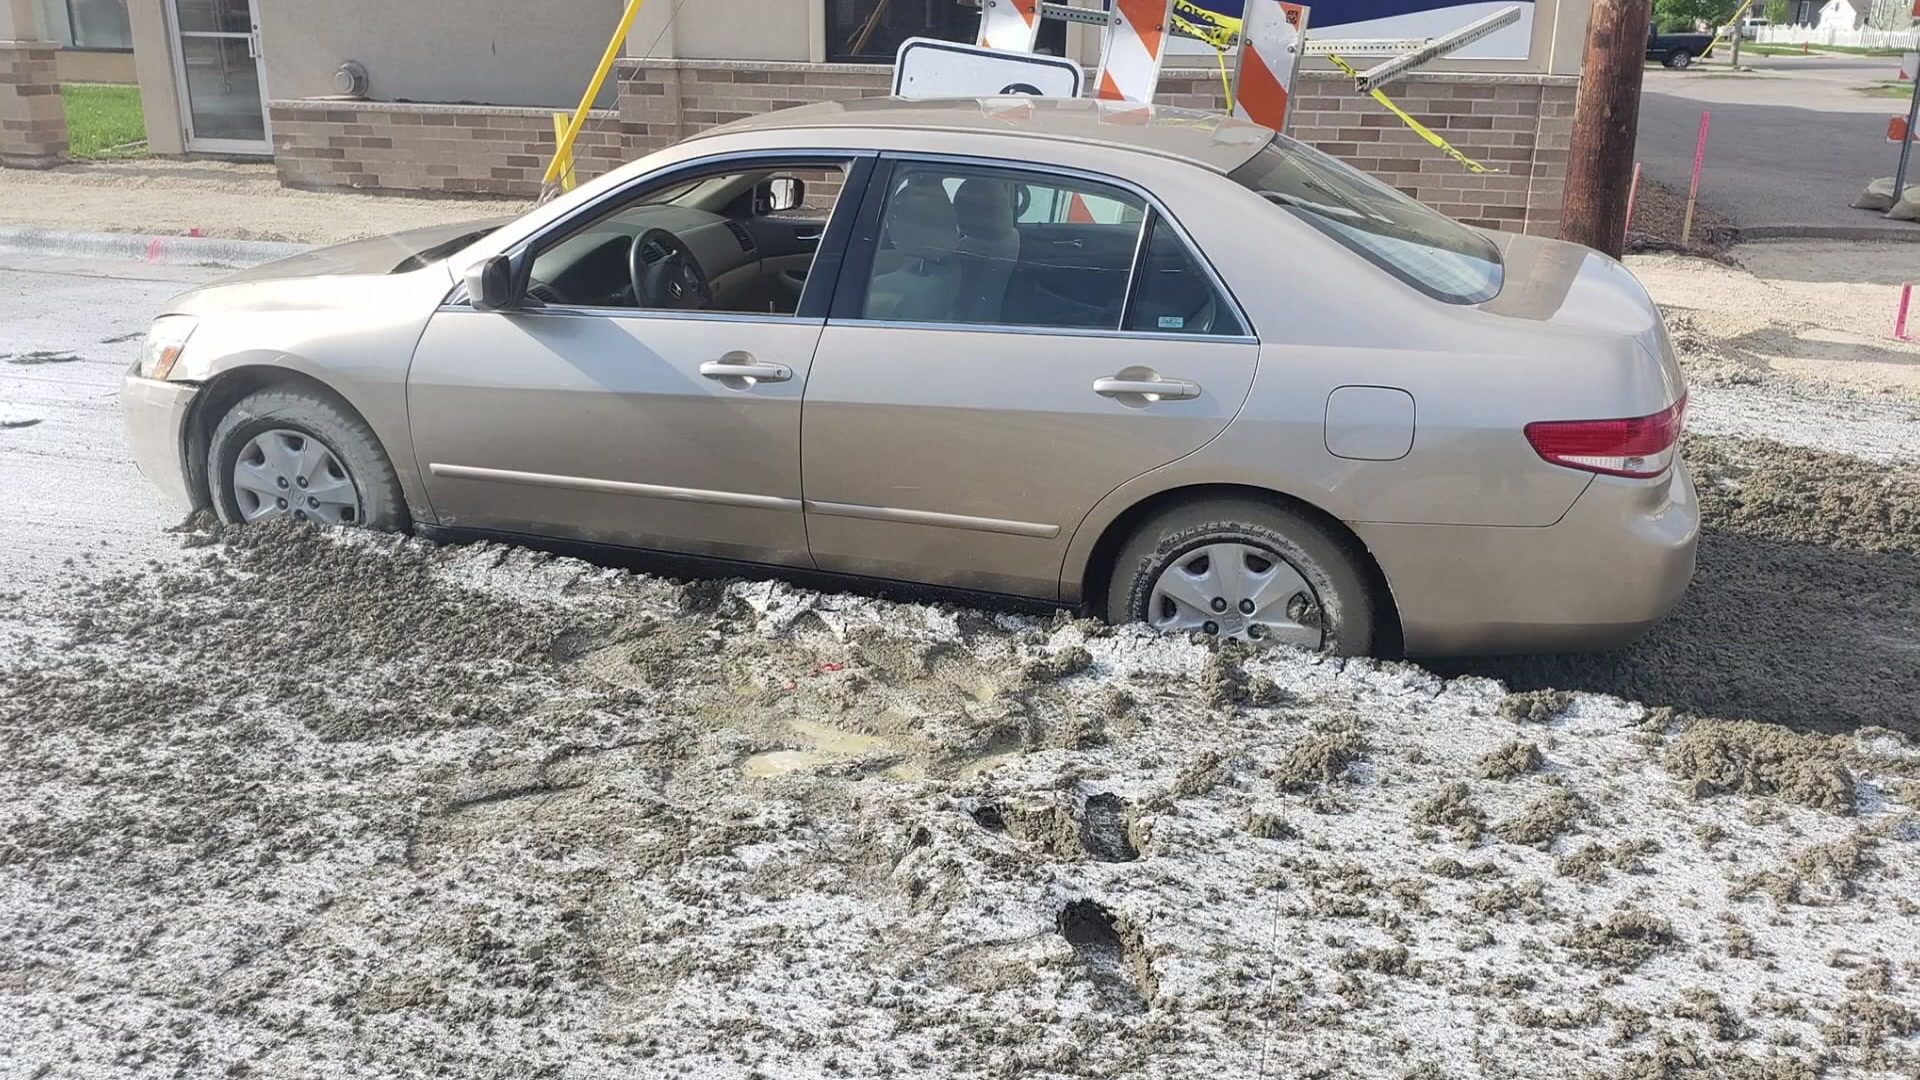 Driver gets stuck in concrete while fleeing police